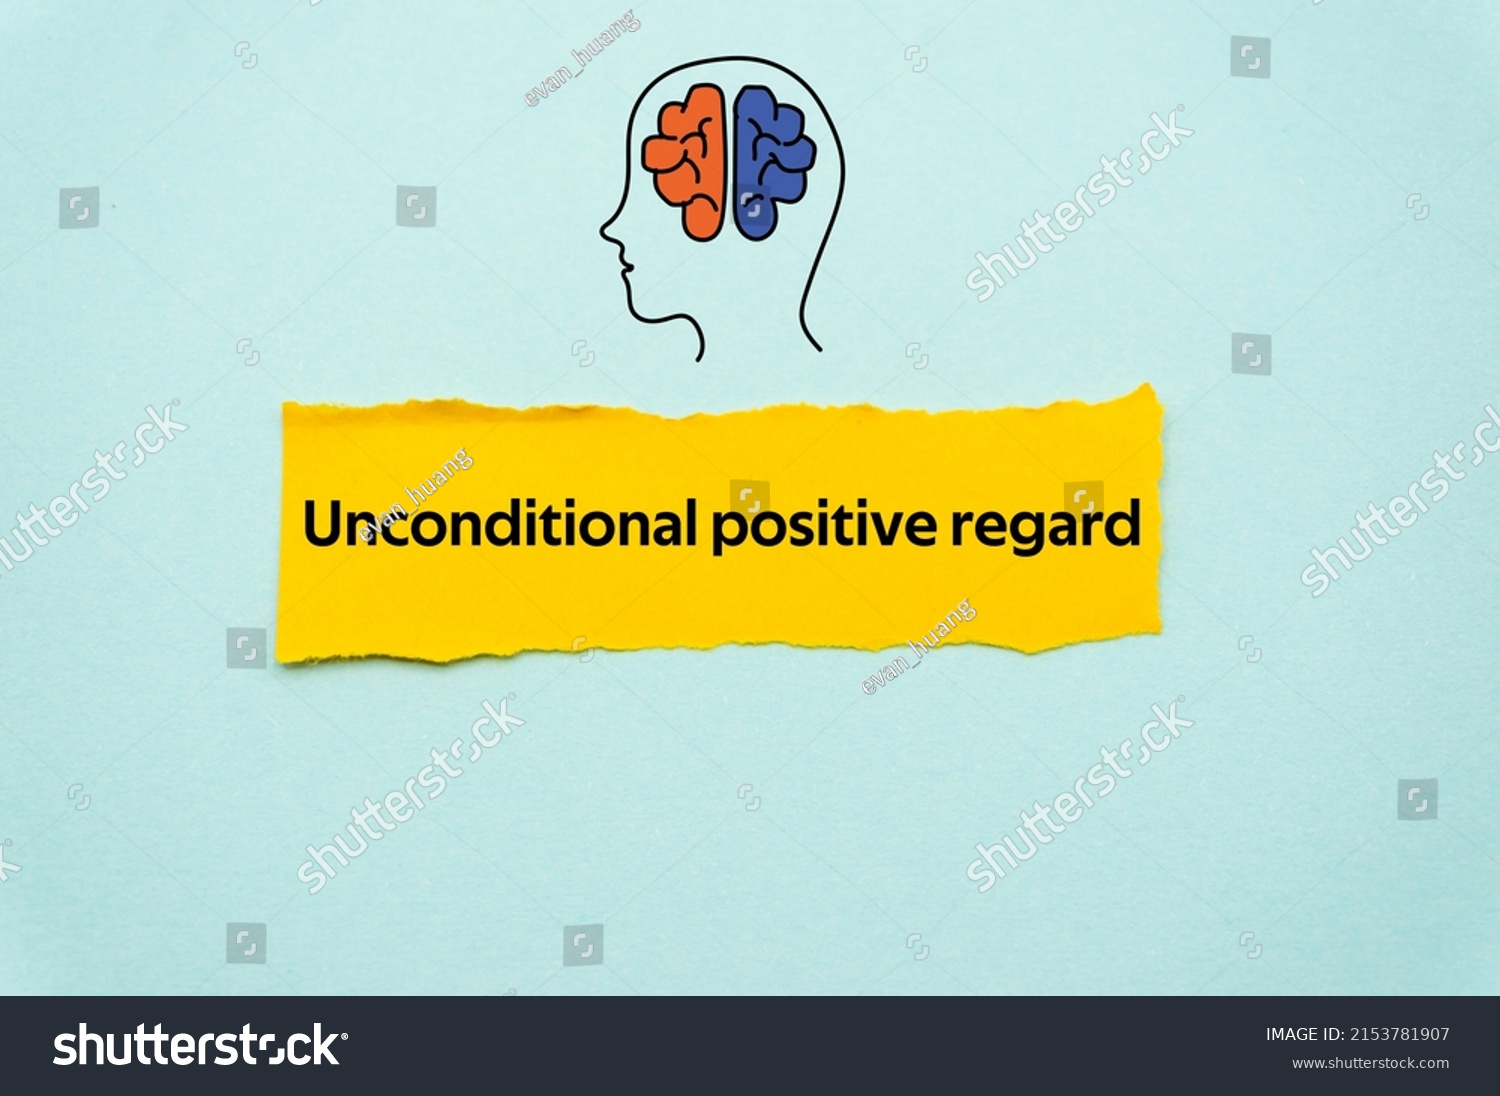 Unconditional positive regard.The word is written on a slip of colored paper. Psychological terms, psychologic words, Spiritual terminology. psychiatric research. Mental Health Buzzwords. #2153781907